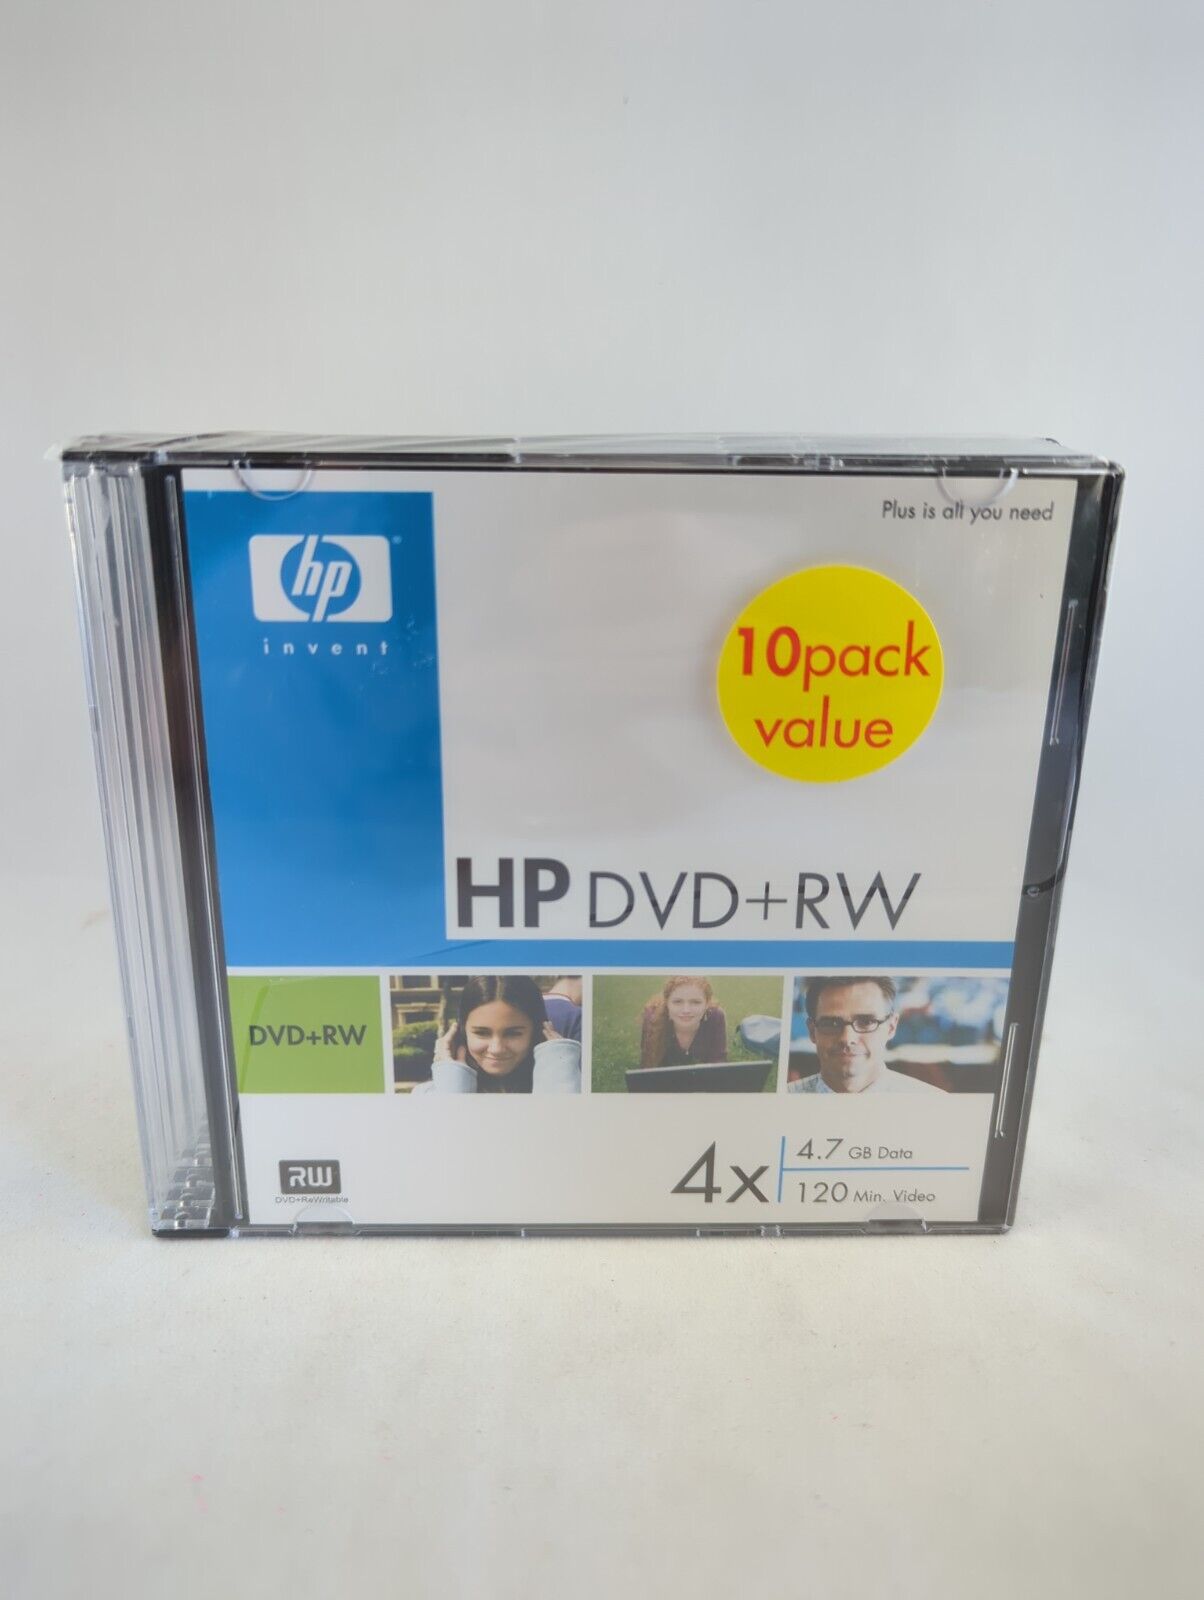 HP INVENT DW00021M DVD+RW 4X, 4.7GB DATA, 120 MIN.VIDEO, 10 PACK Factory Sealed